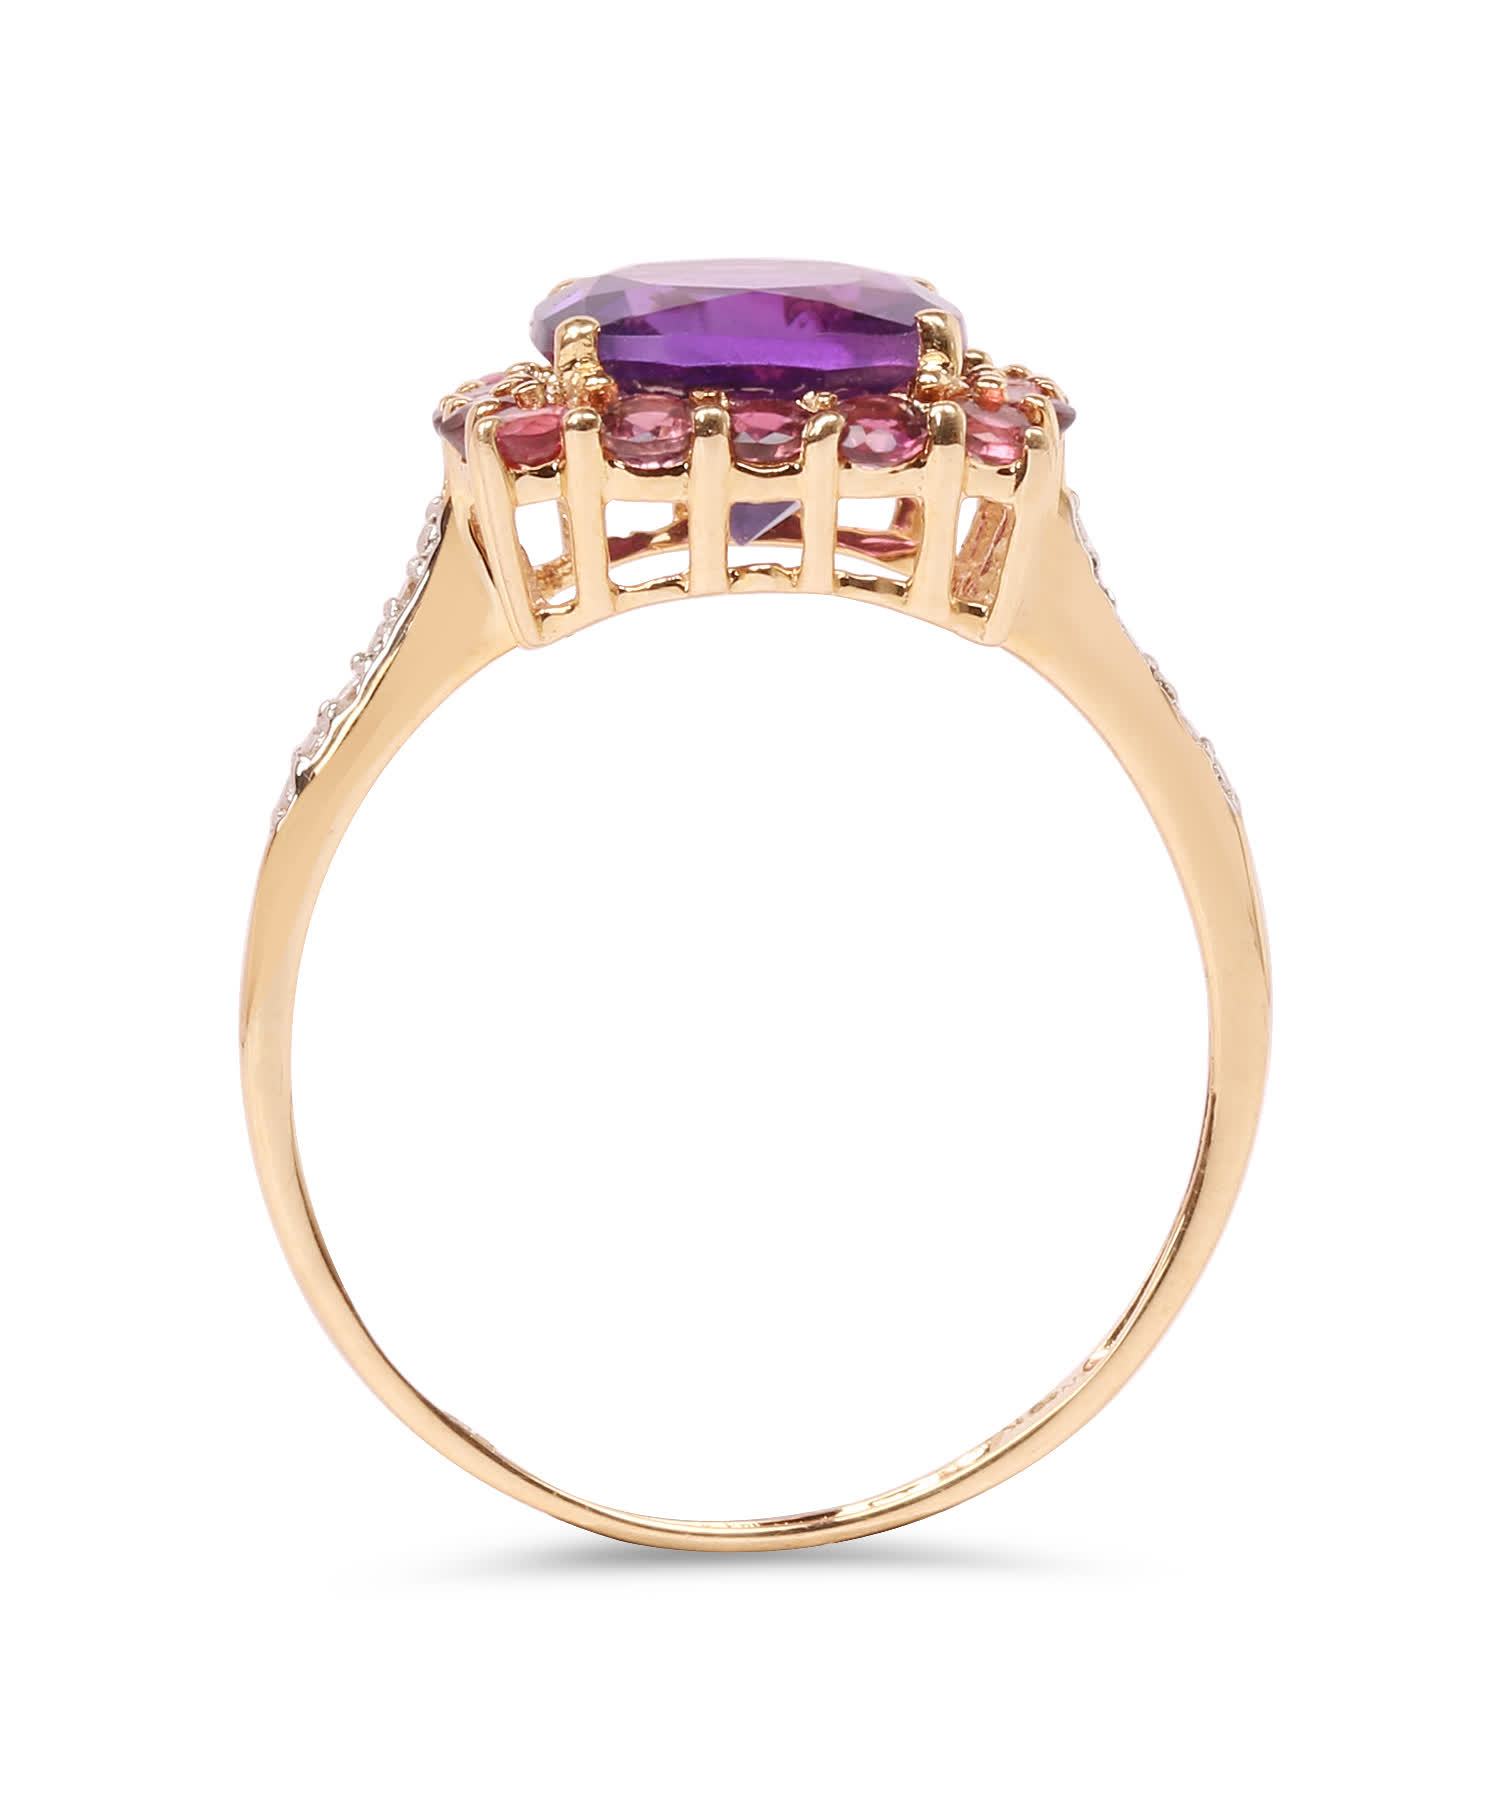 2.38ctw Natural Amethyst, Pink Tourmaline and Diamond 10k Gold Ring View 2